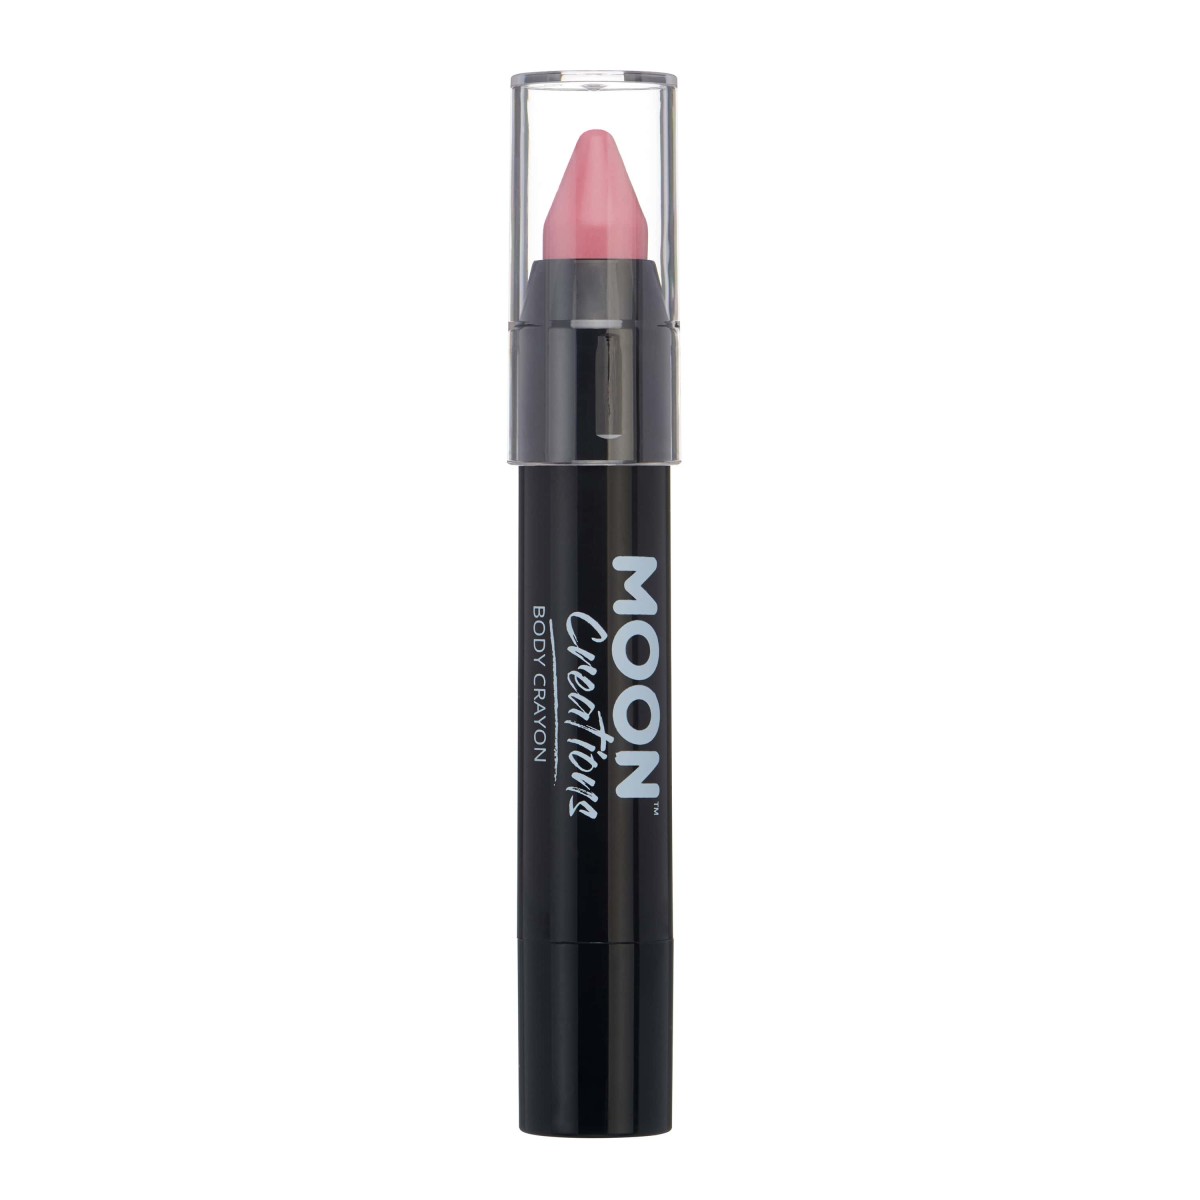 MOON CREATIONS C3 FACE & BODY CRAYON PINK 3.2g